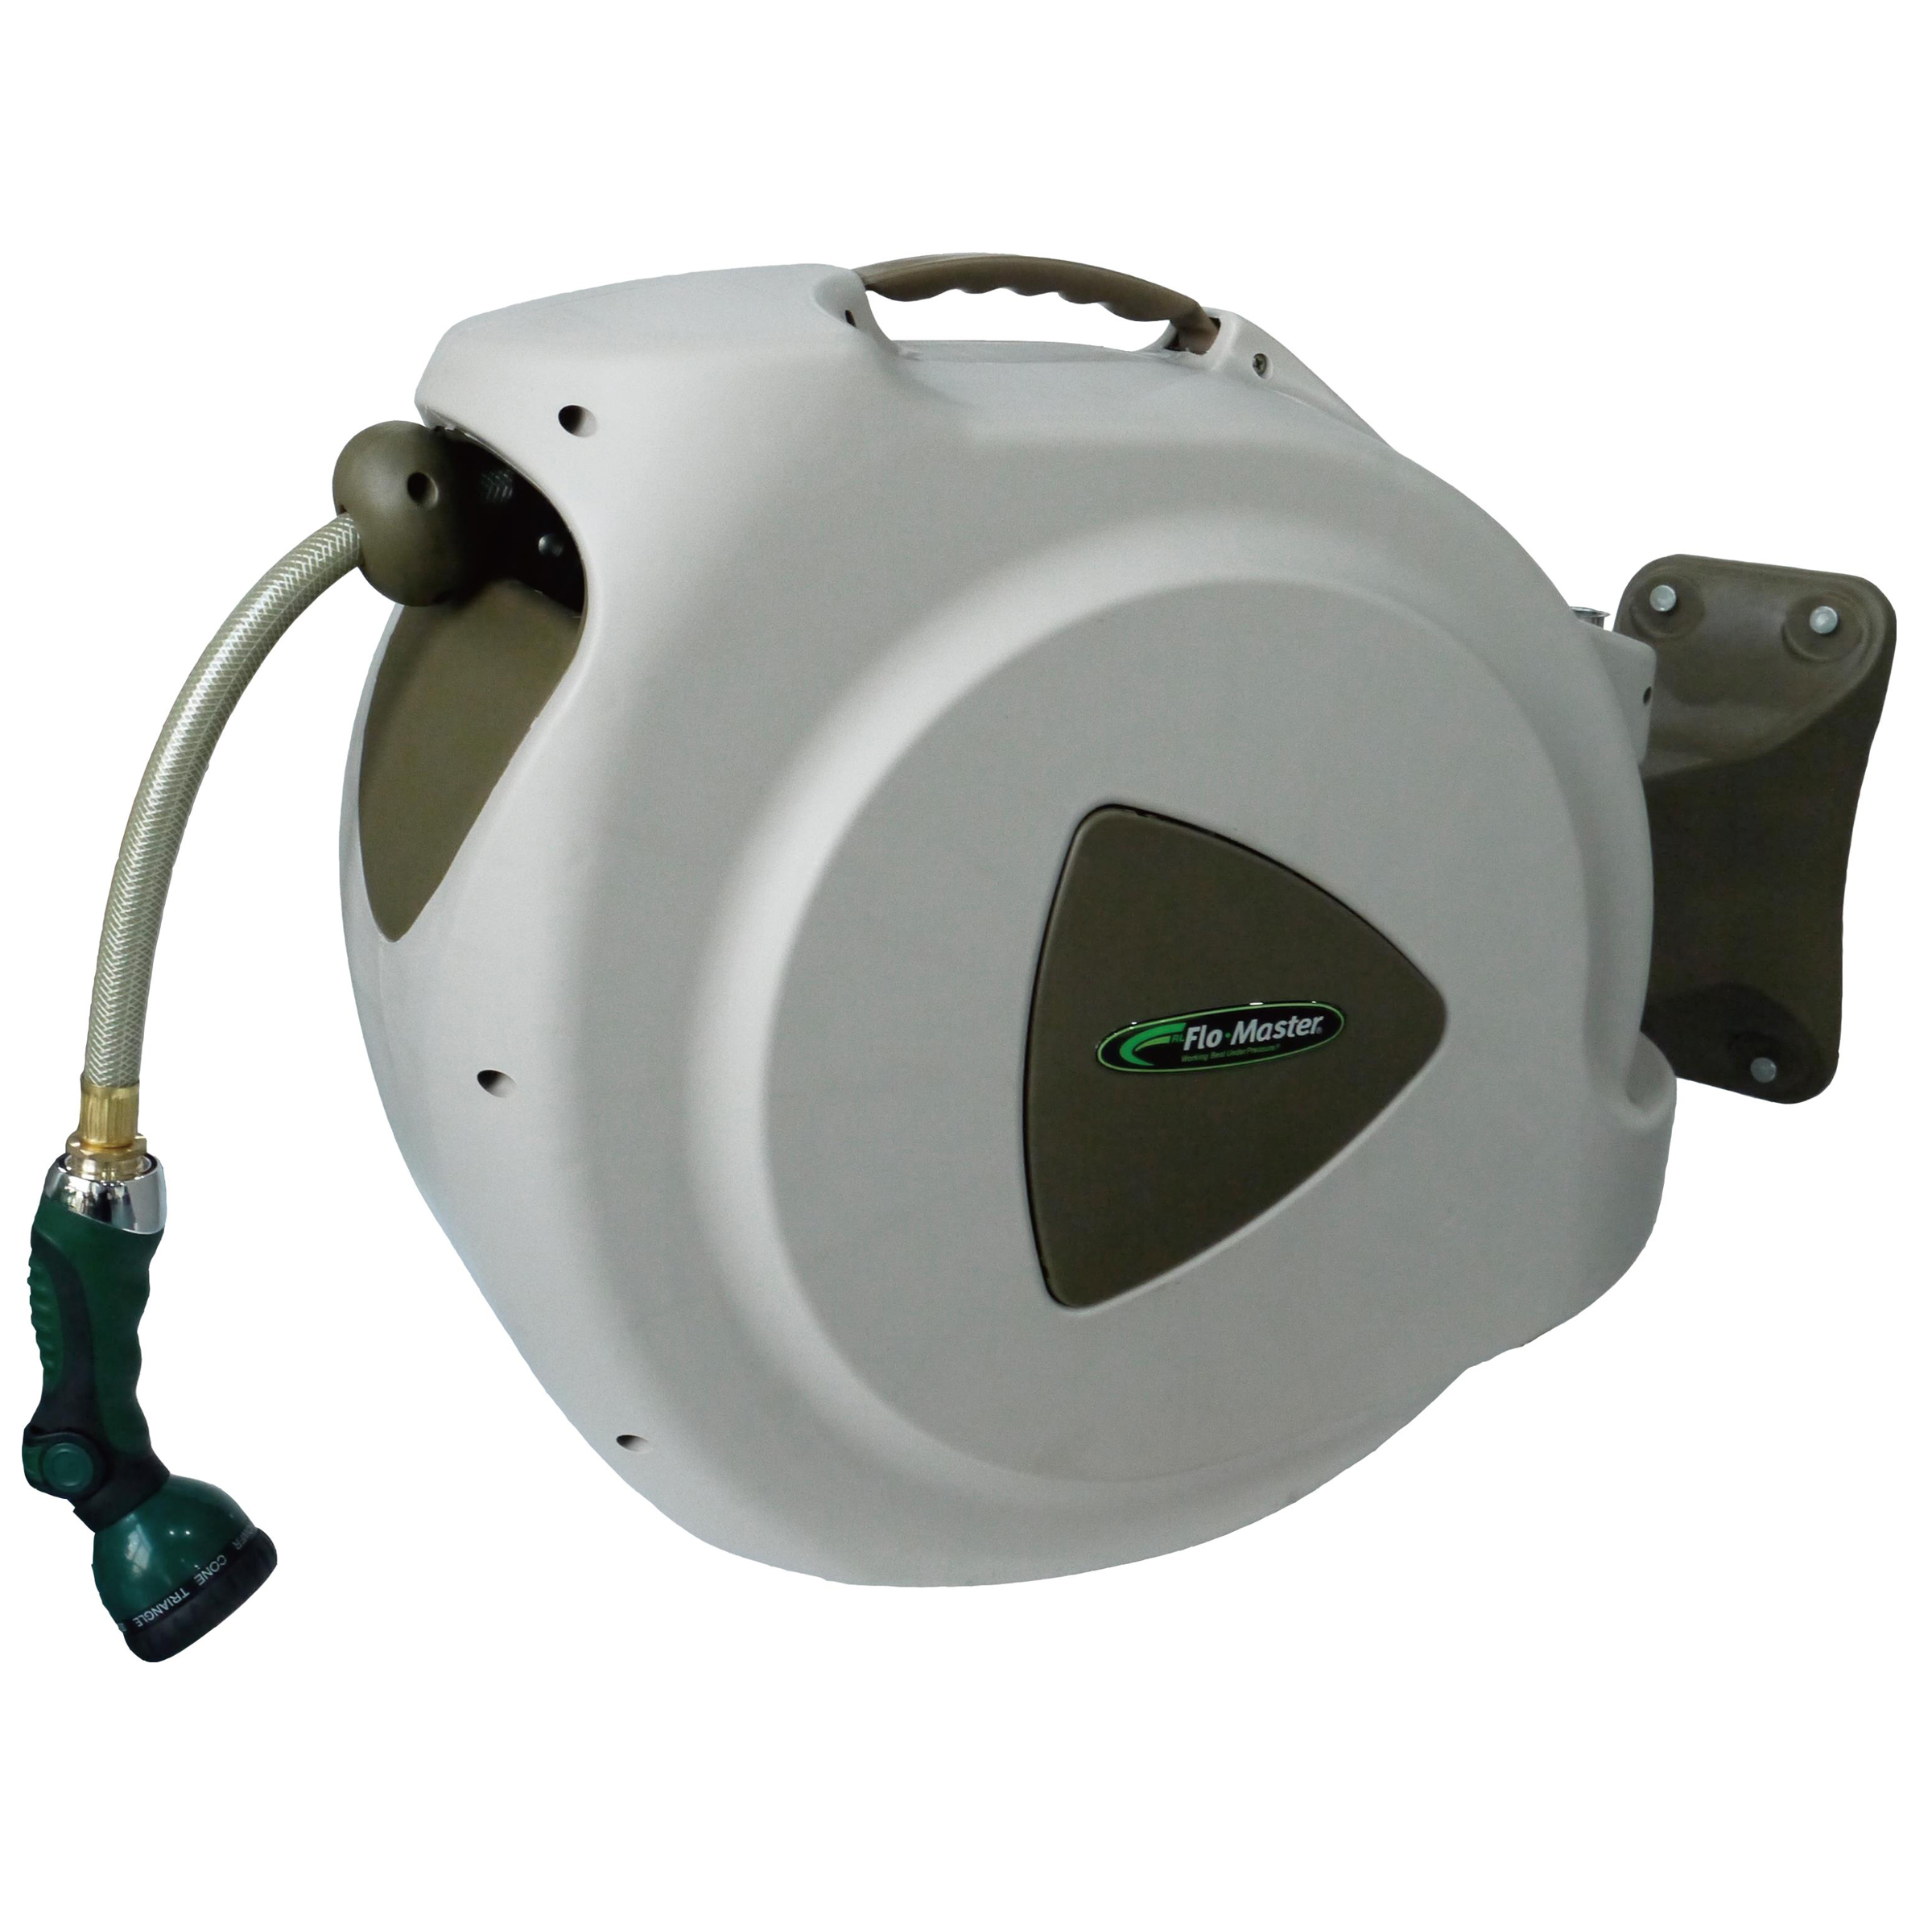 RL Flo-Master 65HR8 Hose Reel with Hose and Nozzle